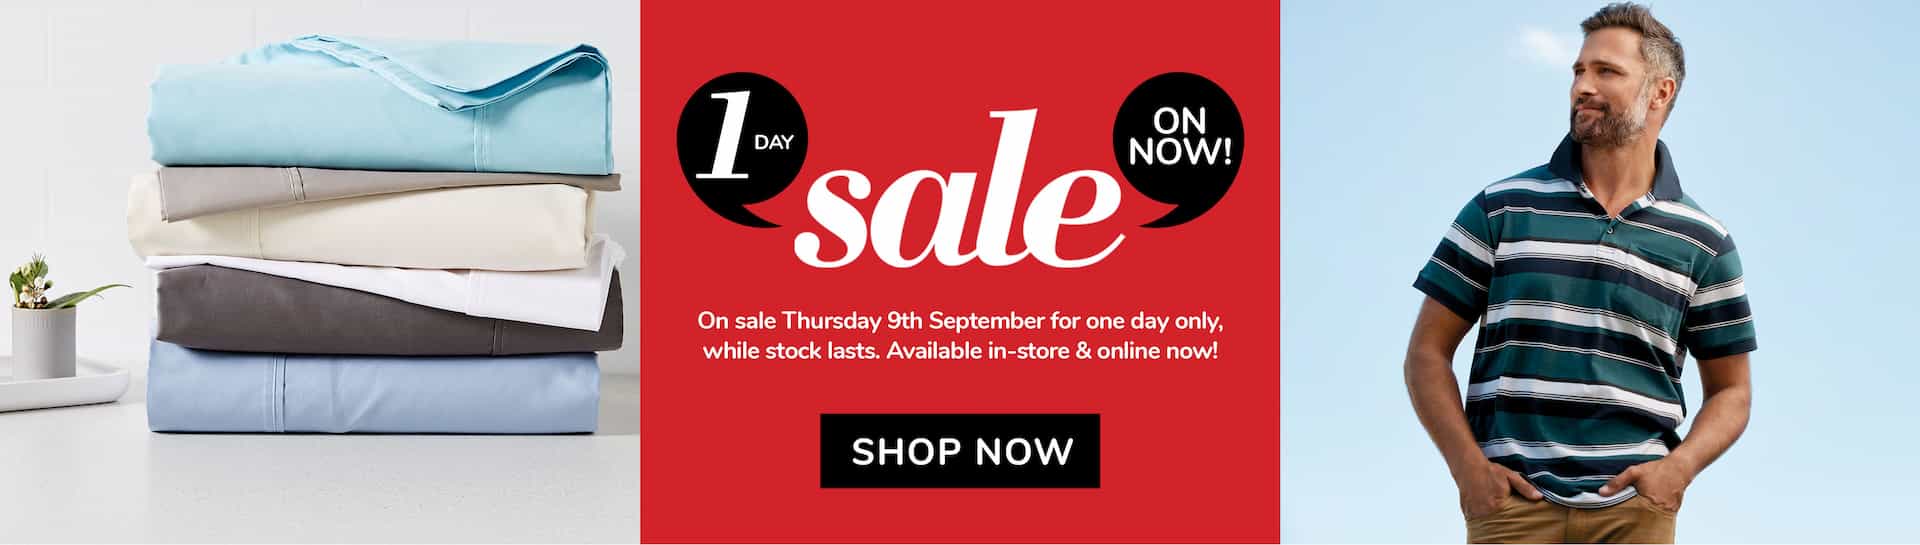 1 Day sale - Up to 50% OFF on footwear, kitchenware & more